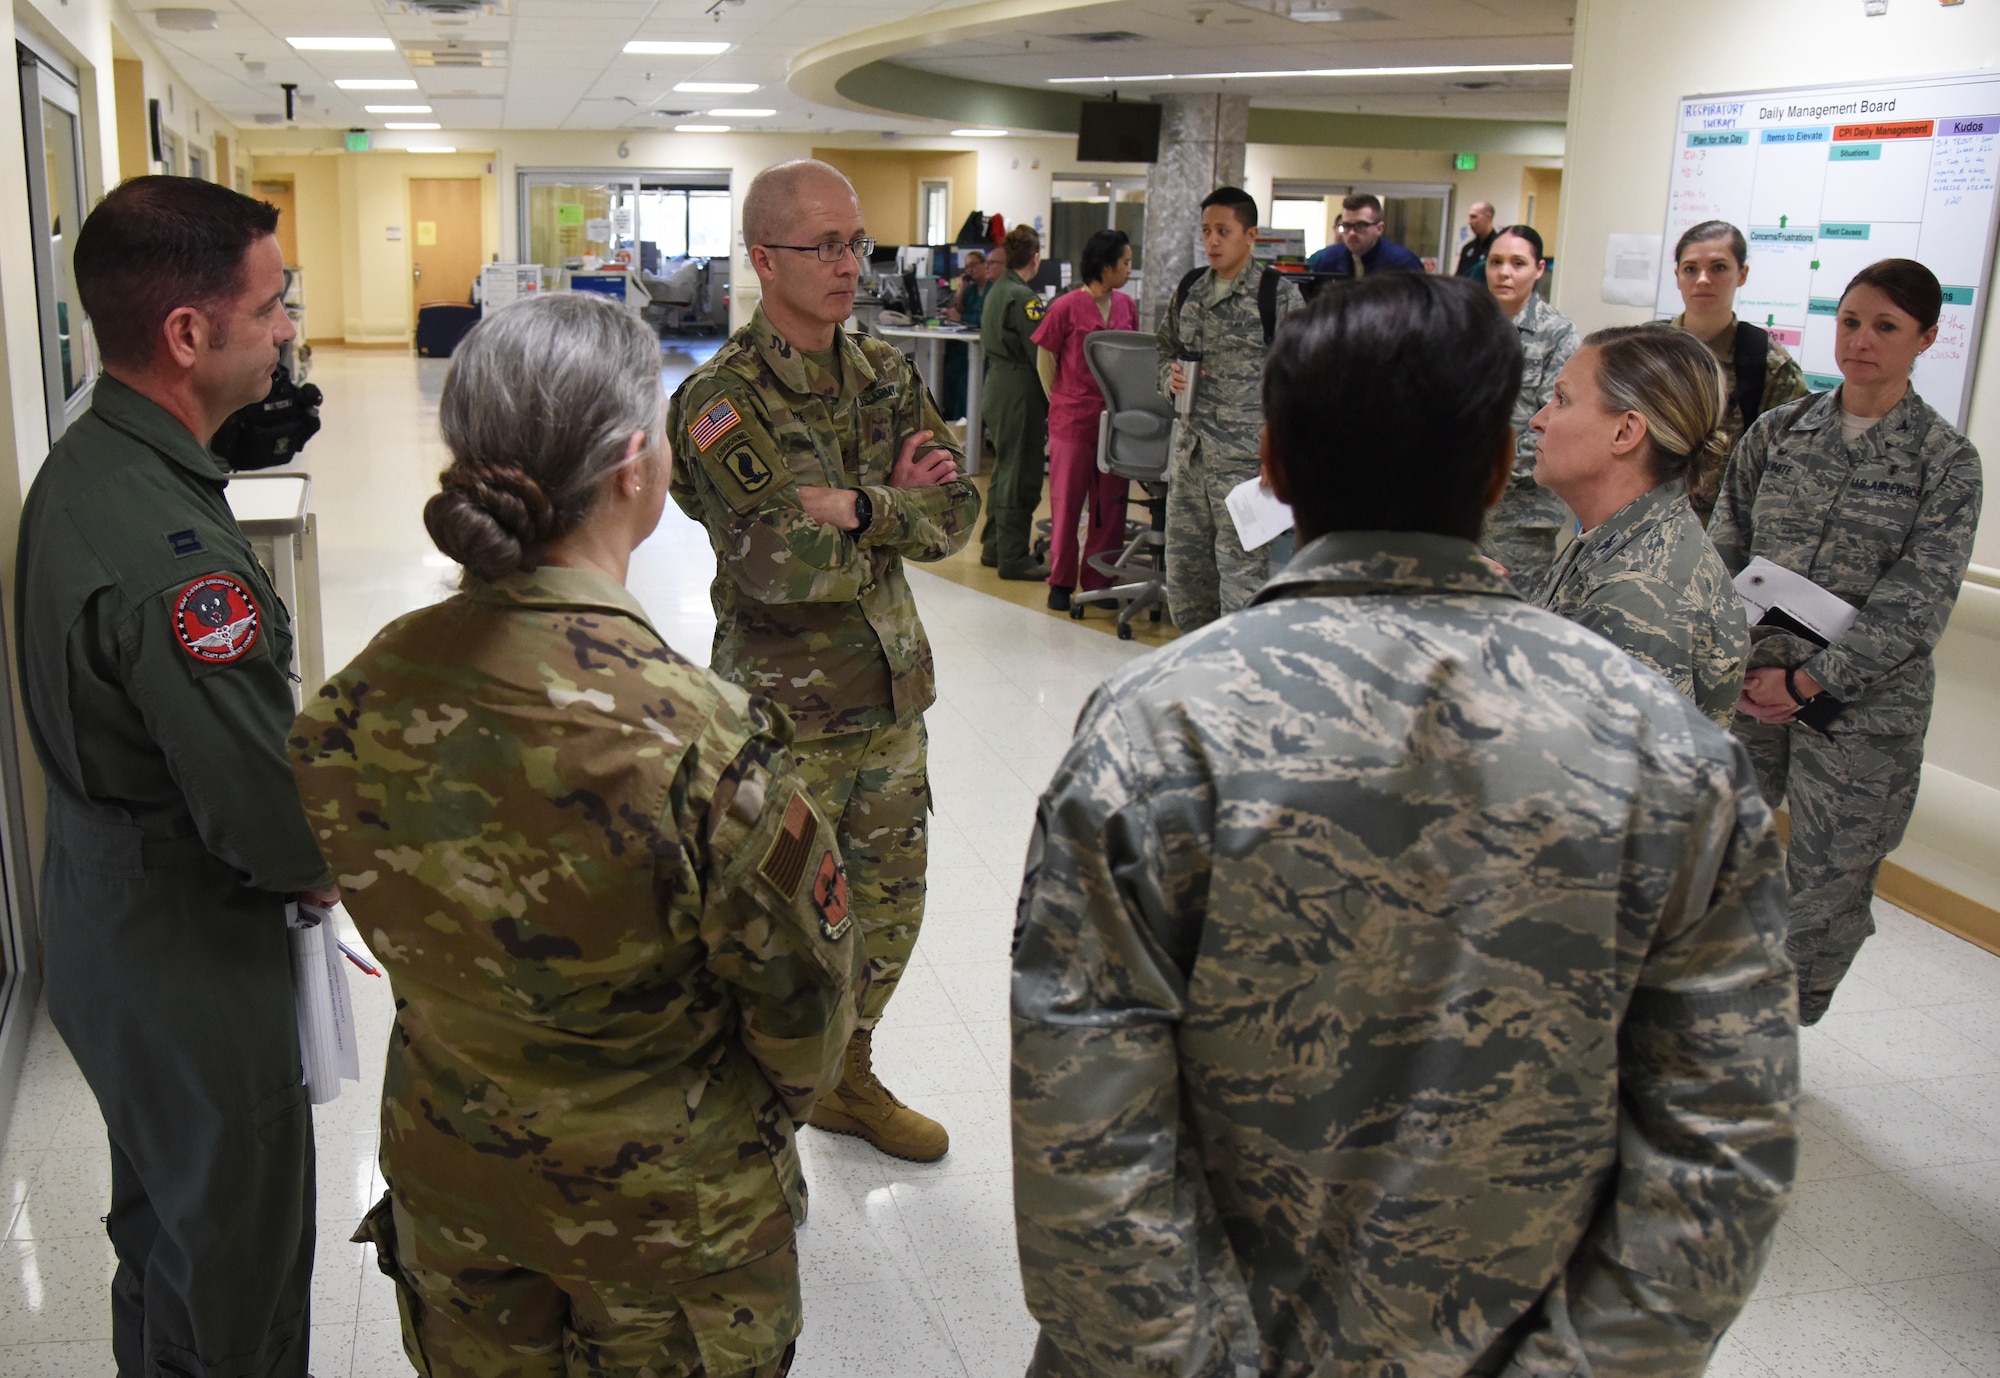 U.S. Air Force Col. Michelle Aastrom, 81st Inpatient Operation Squadron commander, discusses the intensive care unit capabilities with U.S. Army Maj. Gen. Ronald Place, Defense Health Agency, director for the National Capital Region Medical Directorate and Transition Intermediate Management Organization, during an immersion tour inside the Keesler Medical Center at Keesler Air Force Base, Mississippi, Feb. 13, 2019. The purpose of Place's two-day visit was to become more familiar with the medical center's mission capabilities and to receive the status of the 81st Medical Group's transition under DHA. (U.S. Air Force photo by Kemberly Groue)